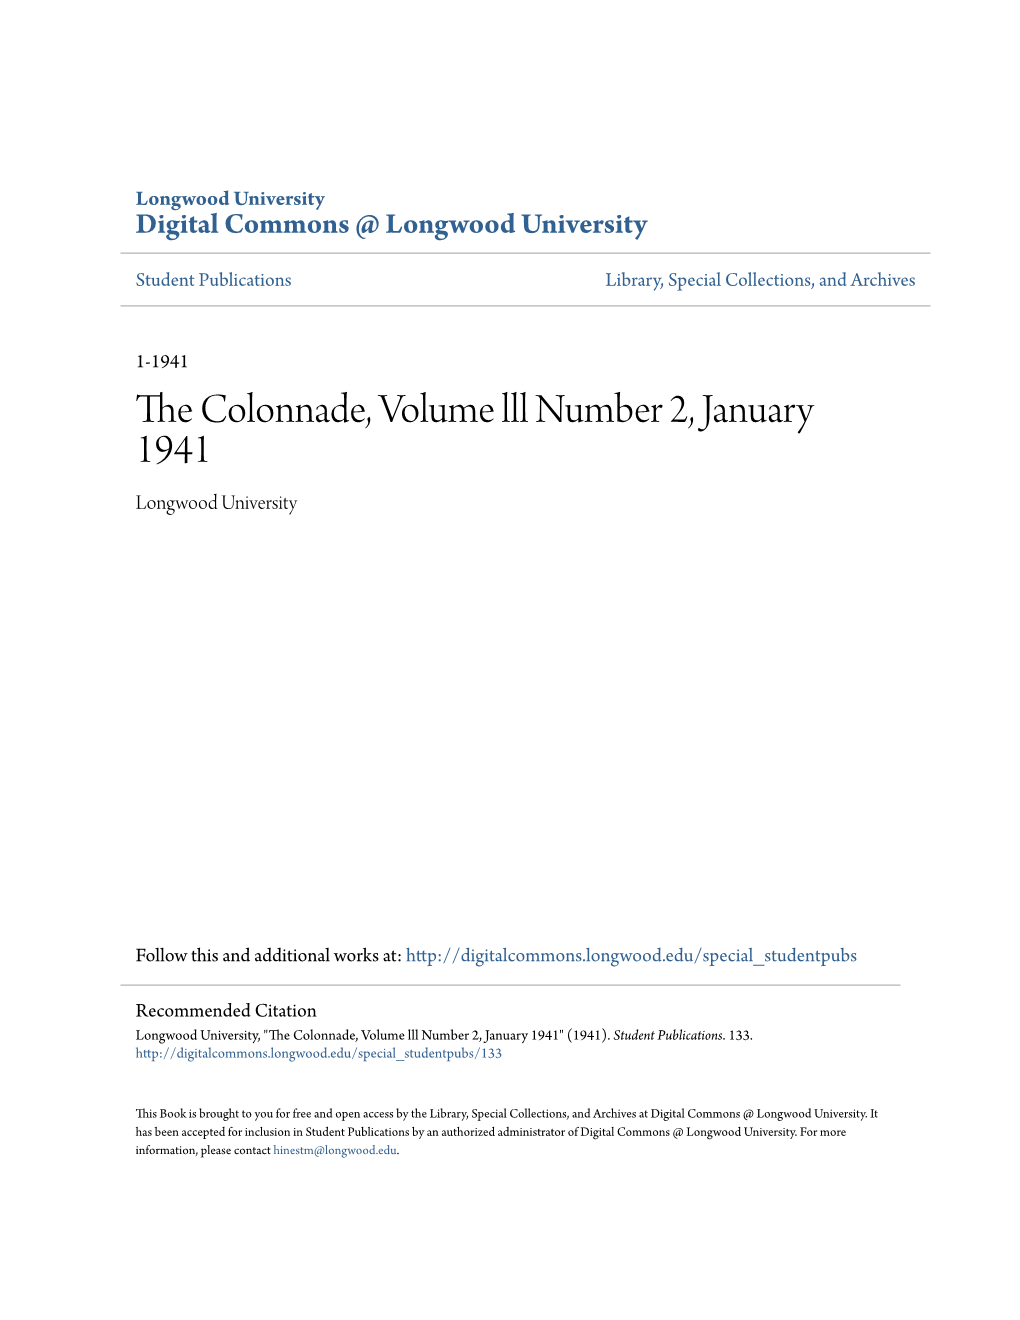 The Colonnade, Volume Lll Number 2, January 1941